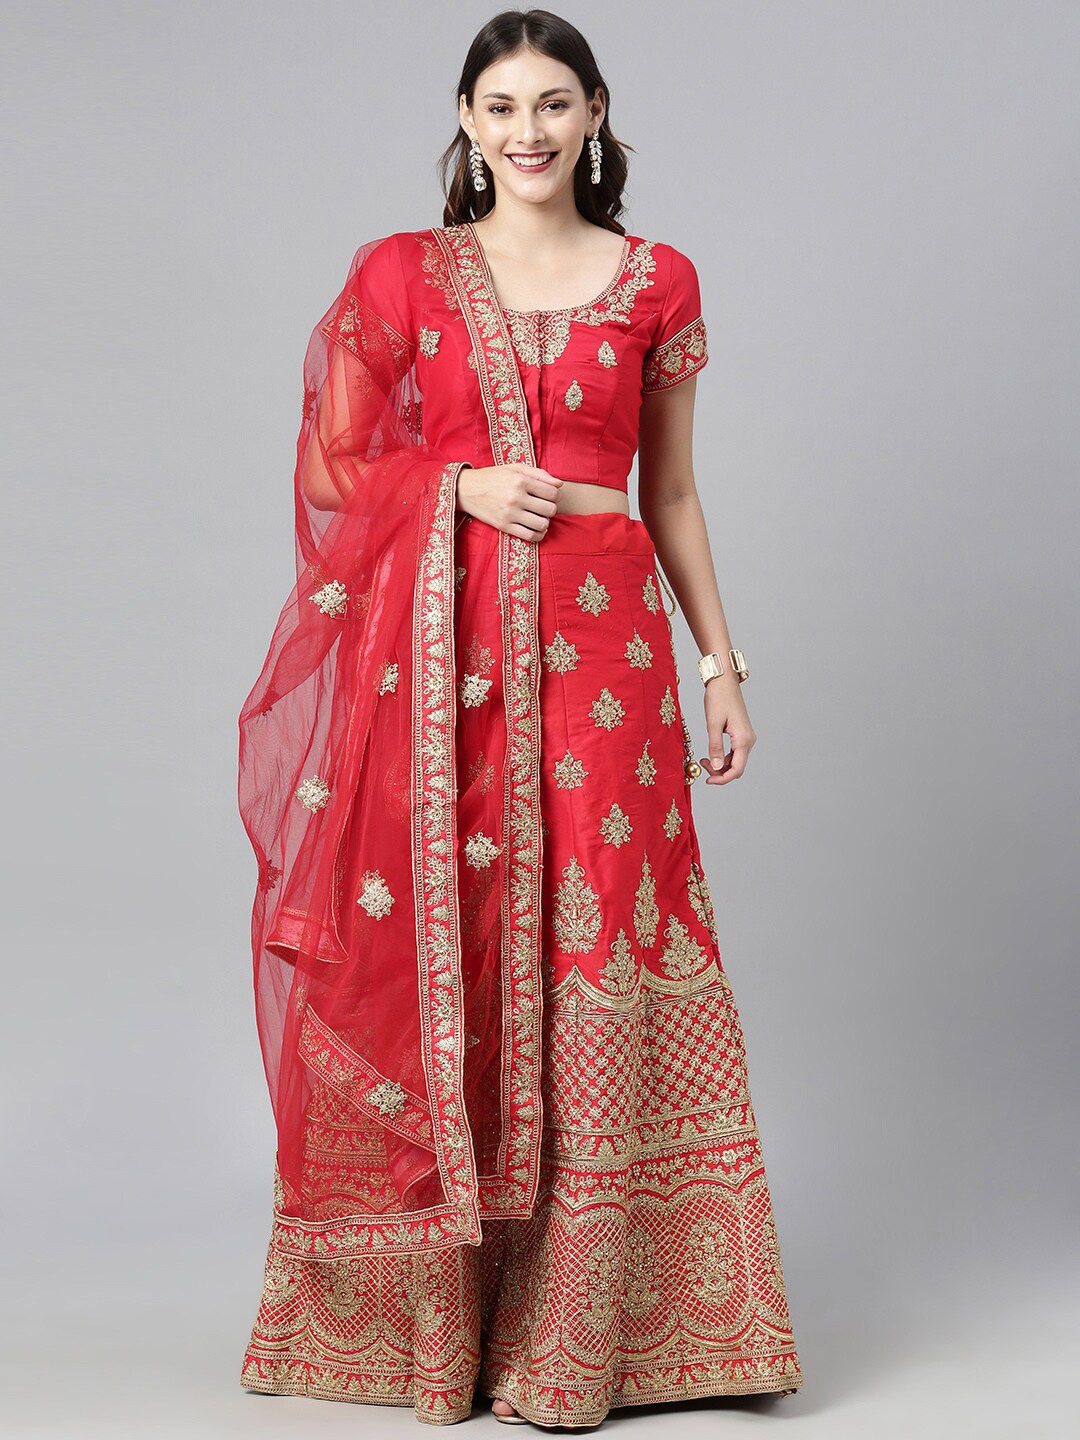 The Chennai Silks Women Red Embroidered Ready To Wear Lehenga Choli with Dupatta Price in India